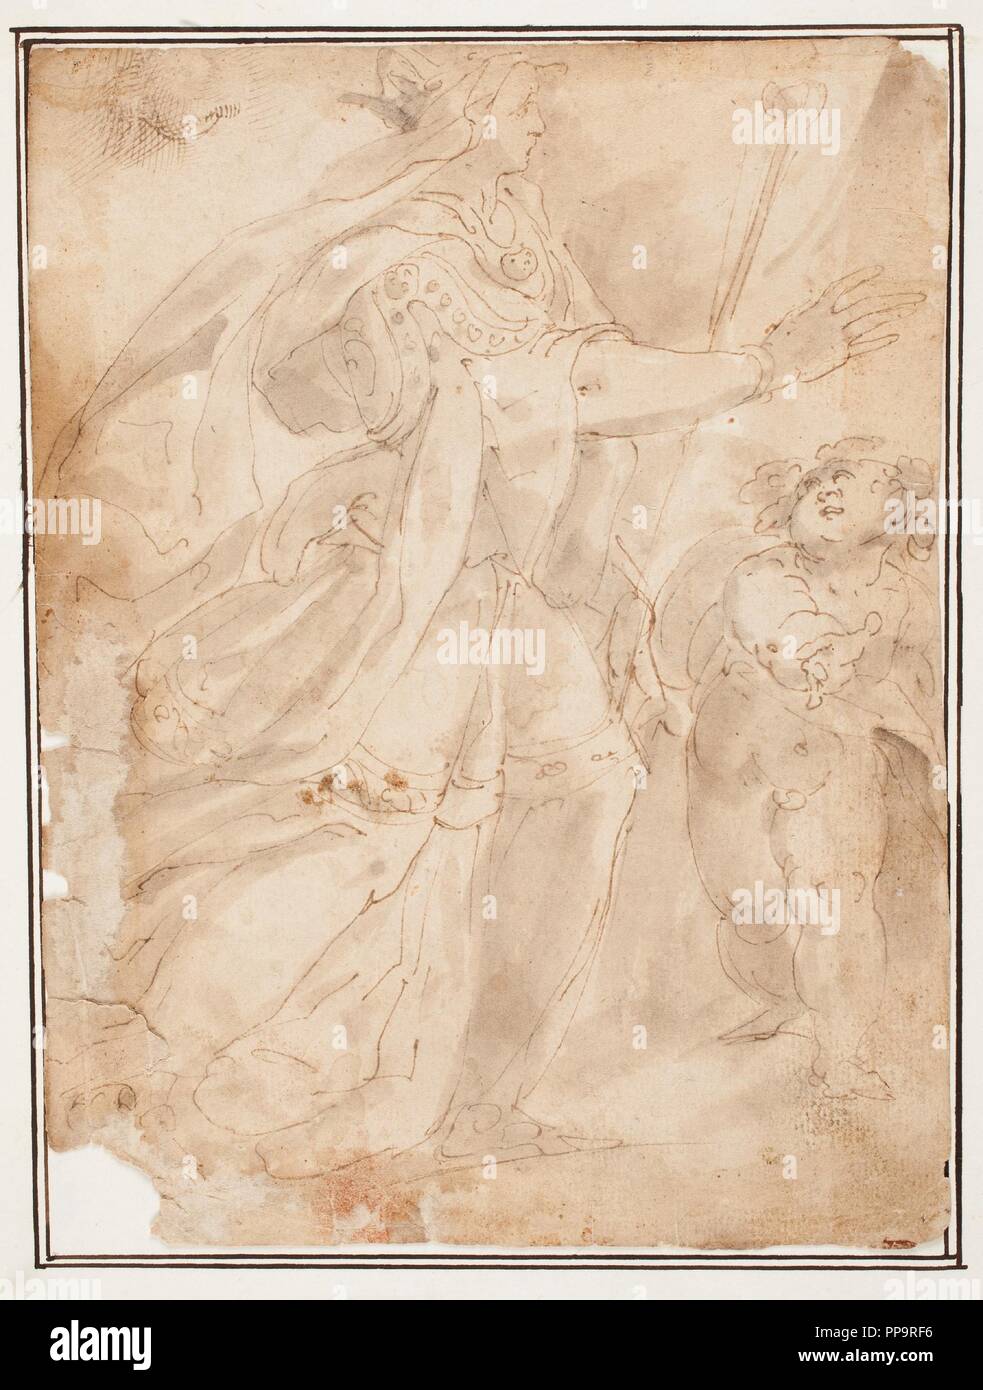 Denys Calvaert / 'Woman wearing robes and a crown, carrying a scepter, accompanied by a child / Study for a composition of ?Noli me tangere?'. XVI century. Wash, Pencil, Grey ink, Grey-brown ink on yellow laid paper. Museum: Museo del Prado, Madrid, España. Stock Photo